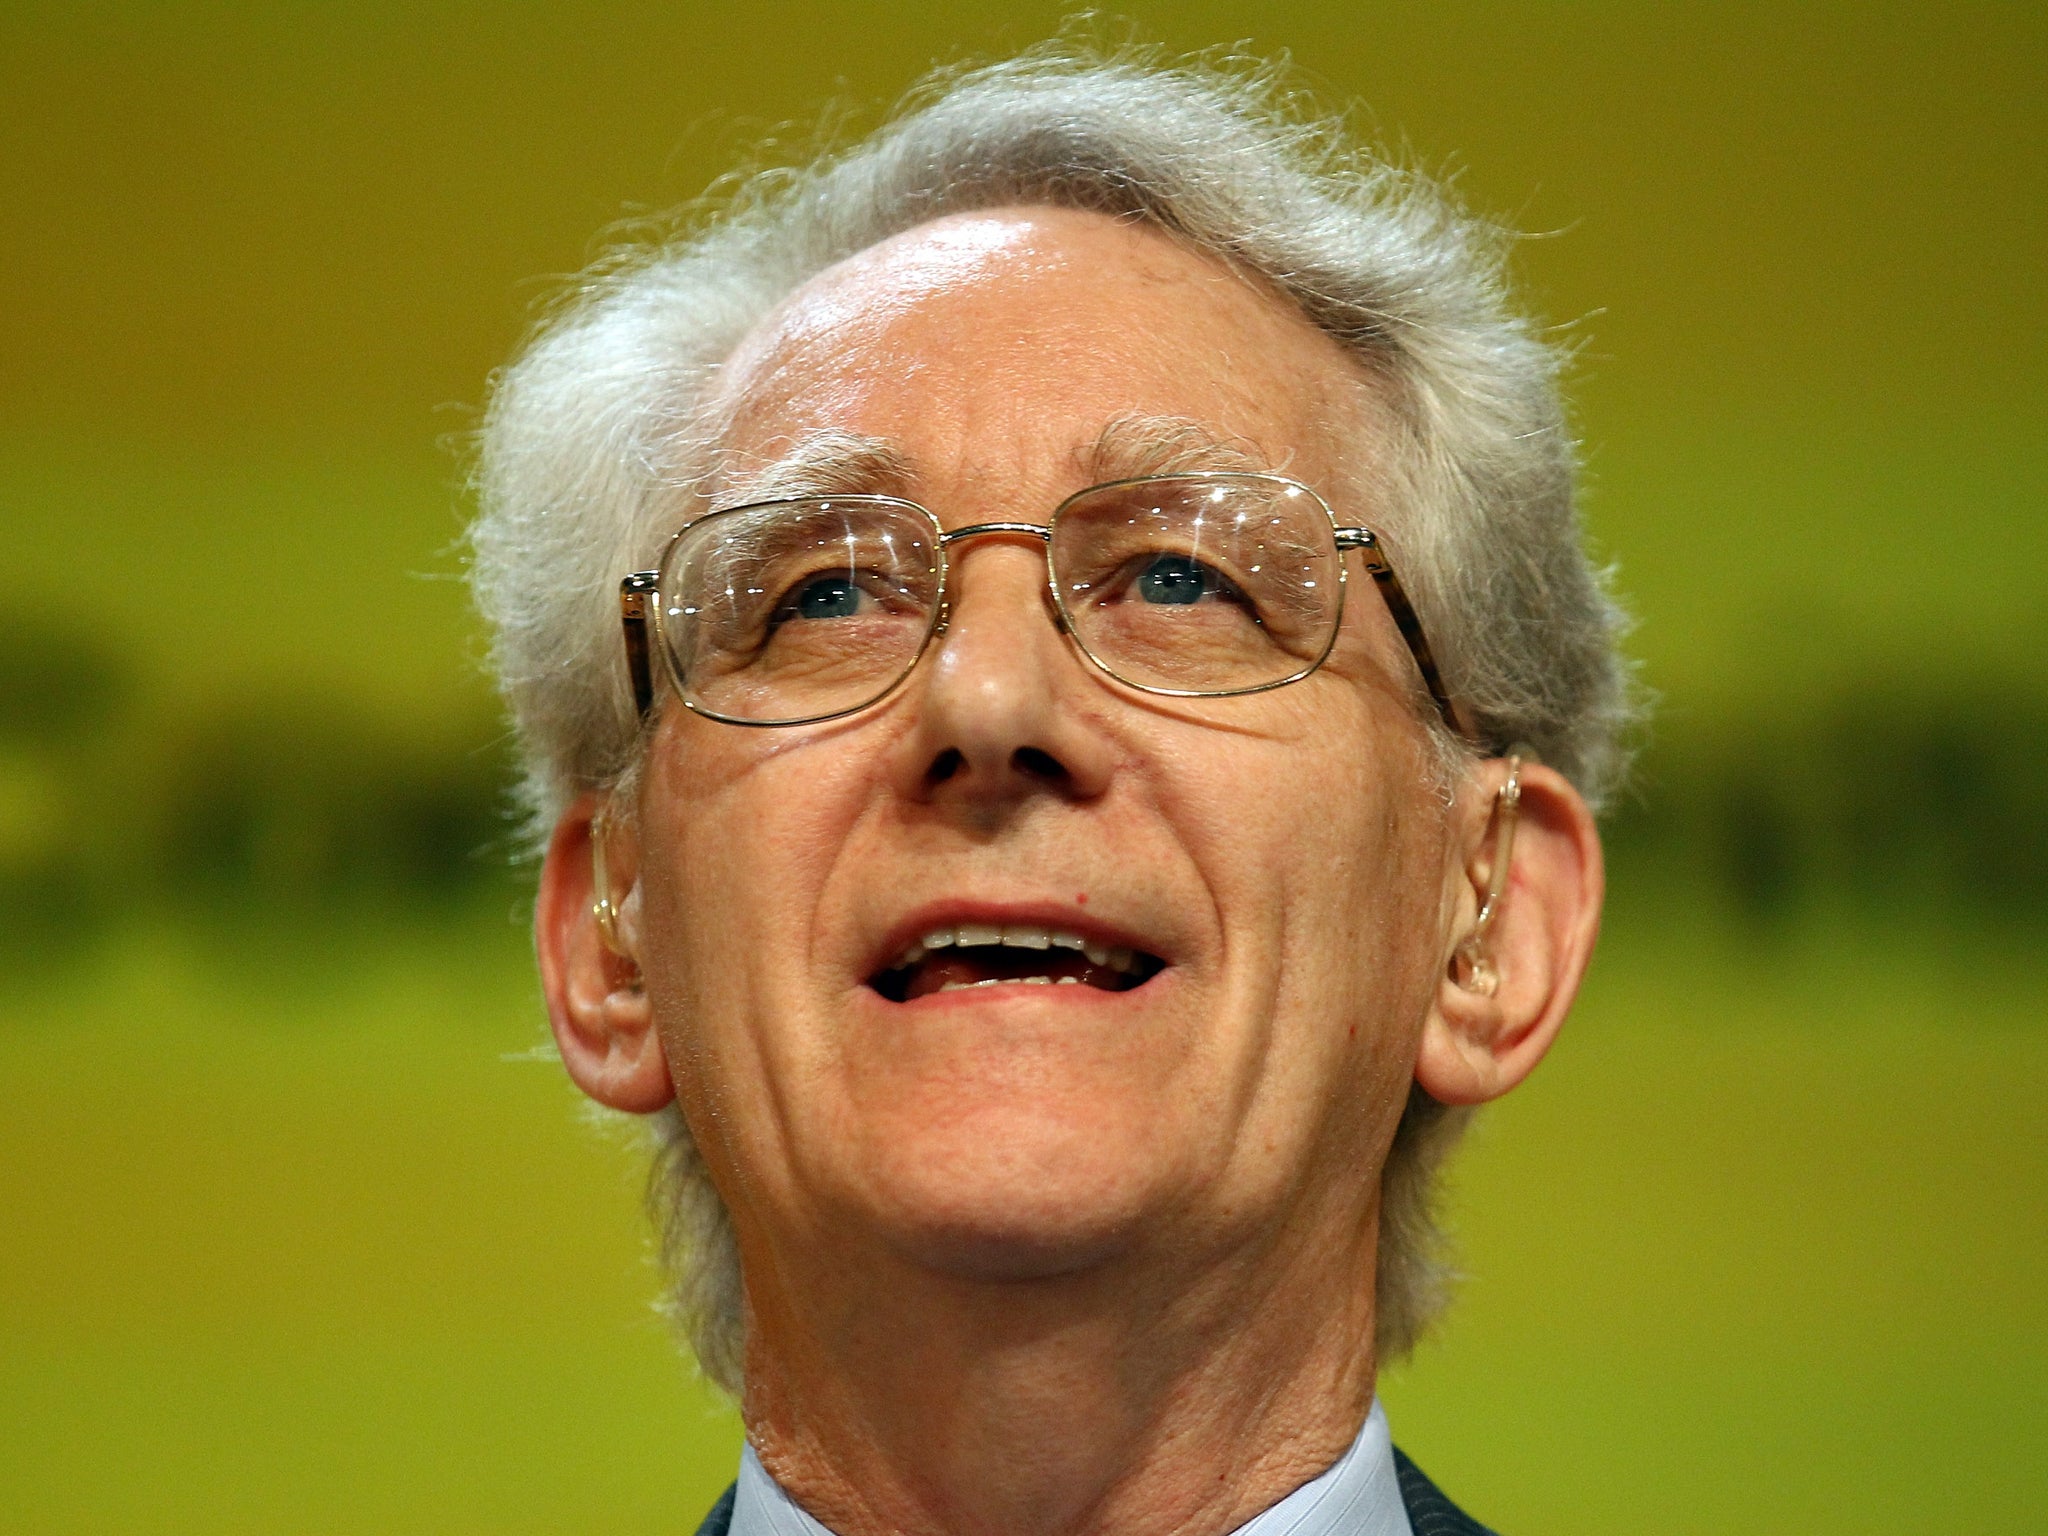 Sir Andrew Stunell mocked the Lib Dems' regional immigration policy in last election